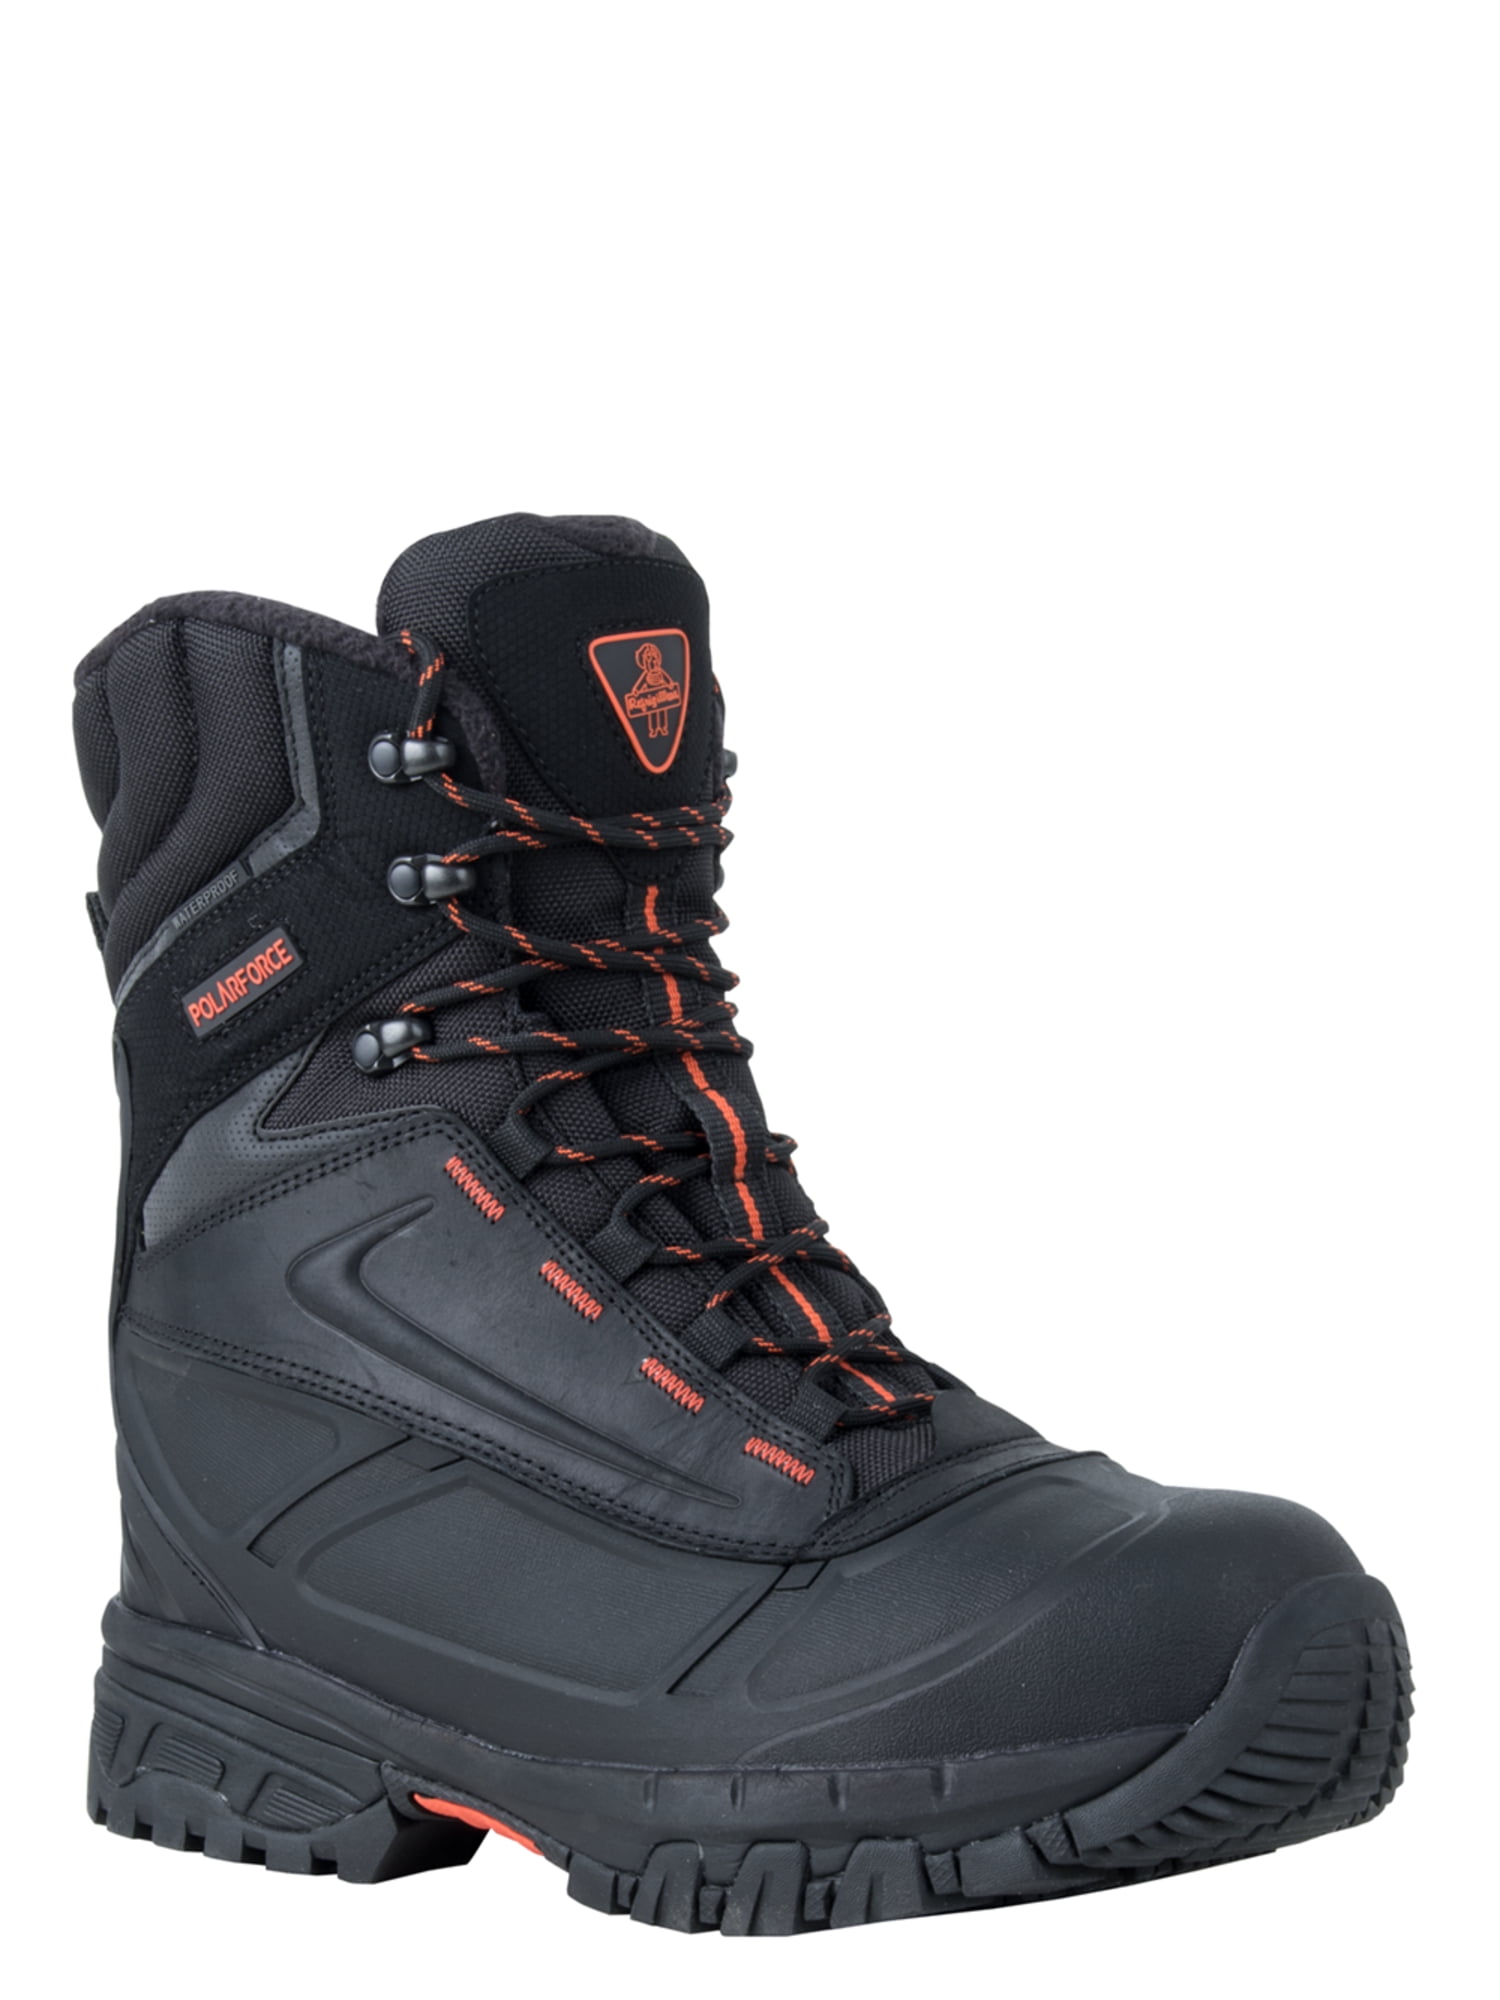 RefrigiWear Mens PolarForce Max Waterproof Insulated 8-Inch Leather Work  Boots (Black, Size 11.5 US)